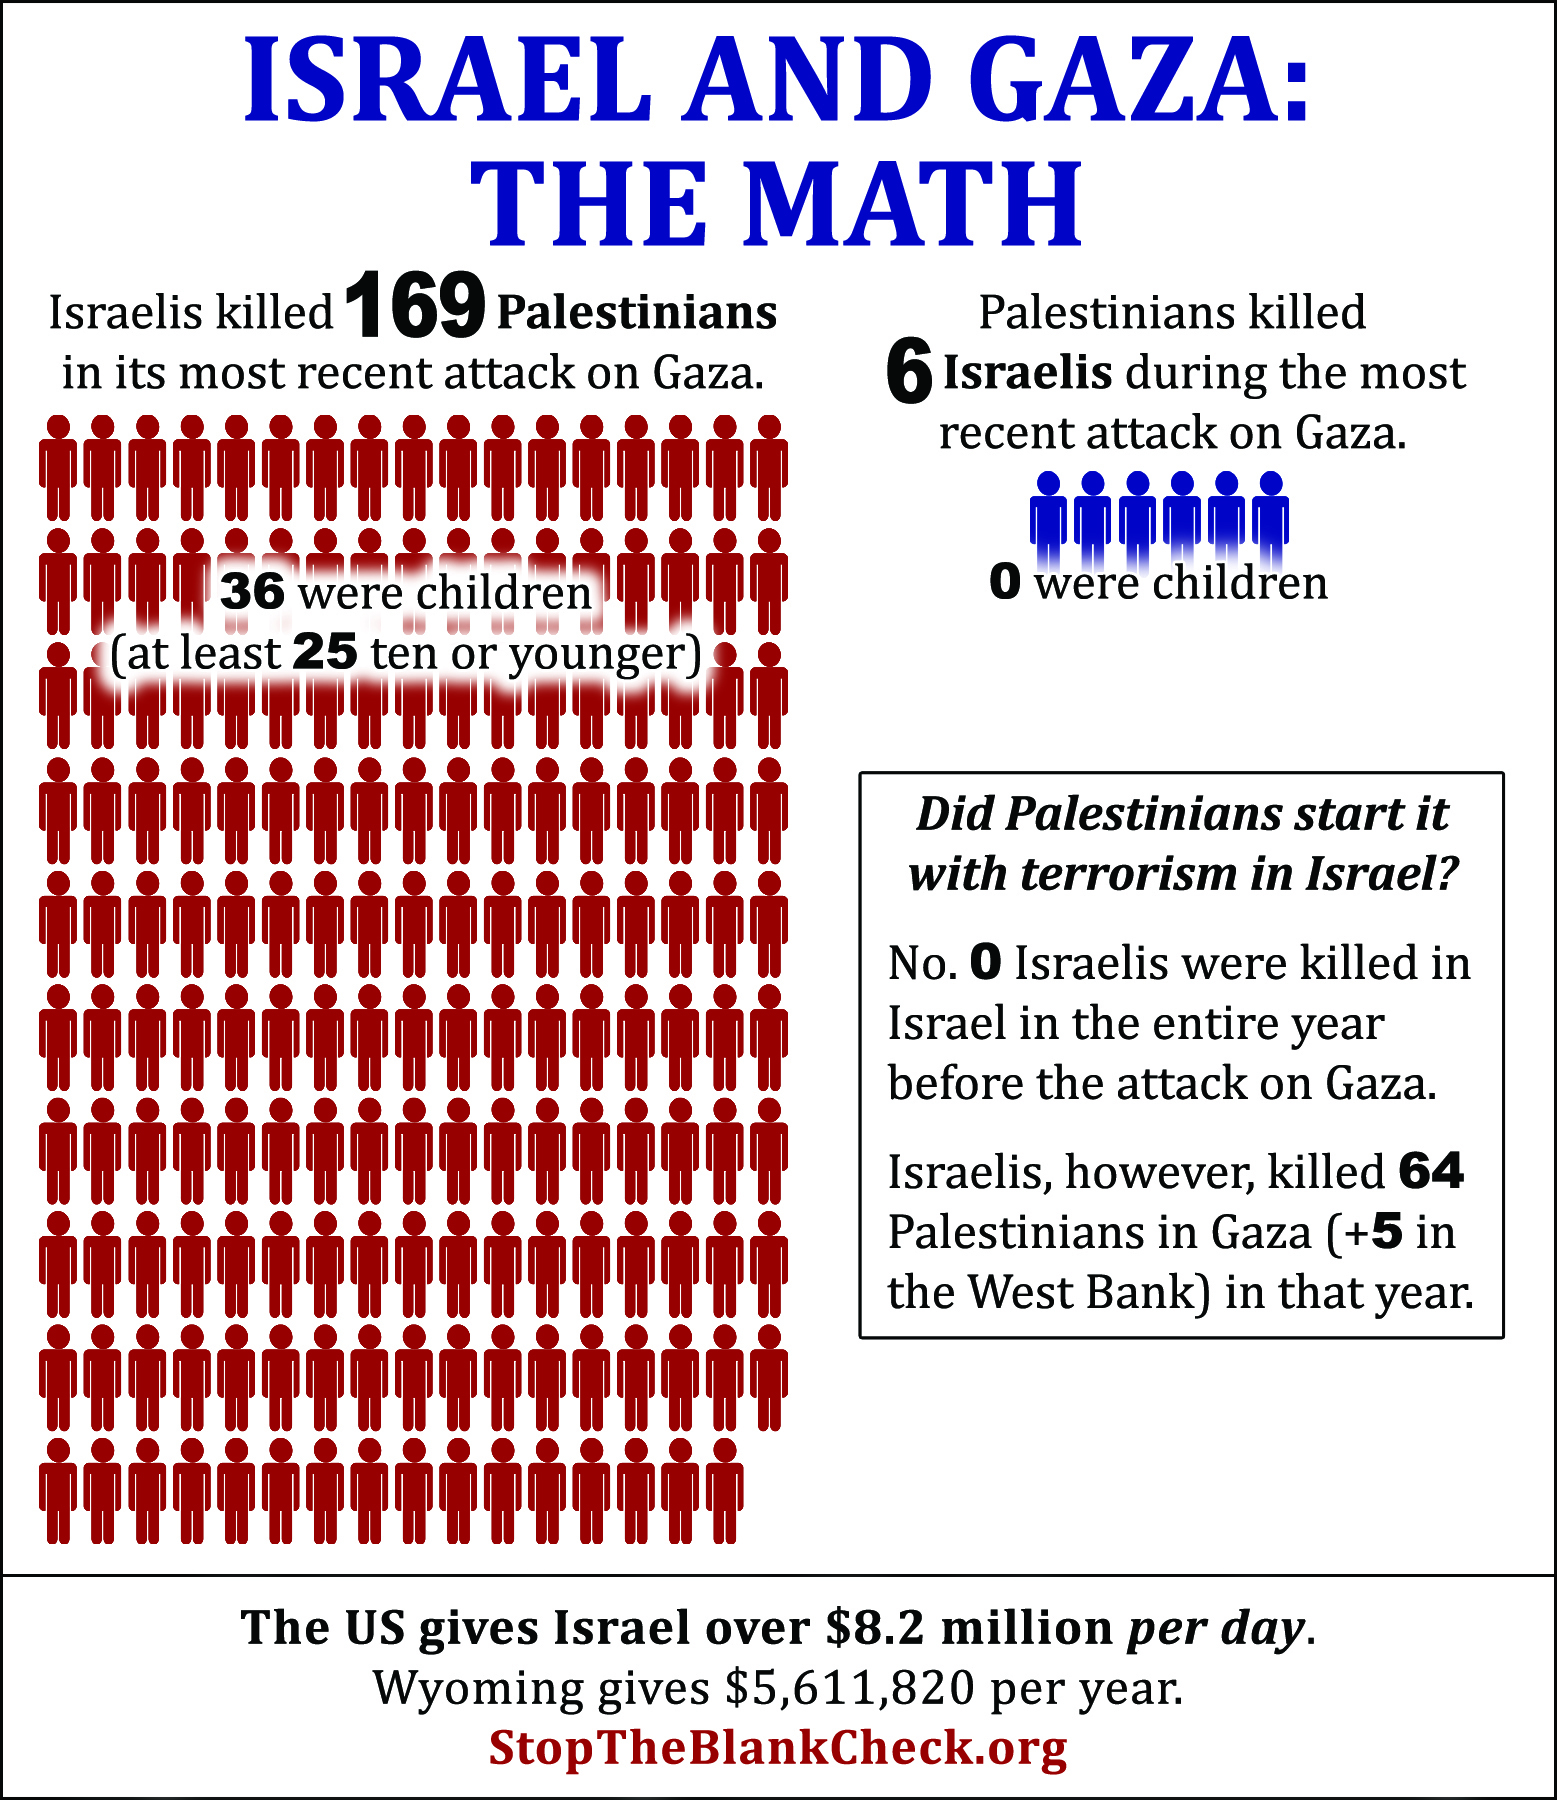 Gaza math chart showing the differences in numbers killed on both sides of the conflict.